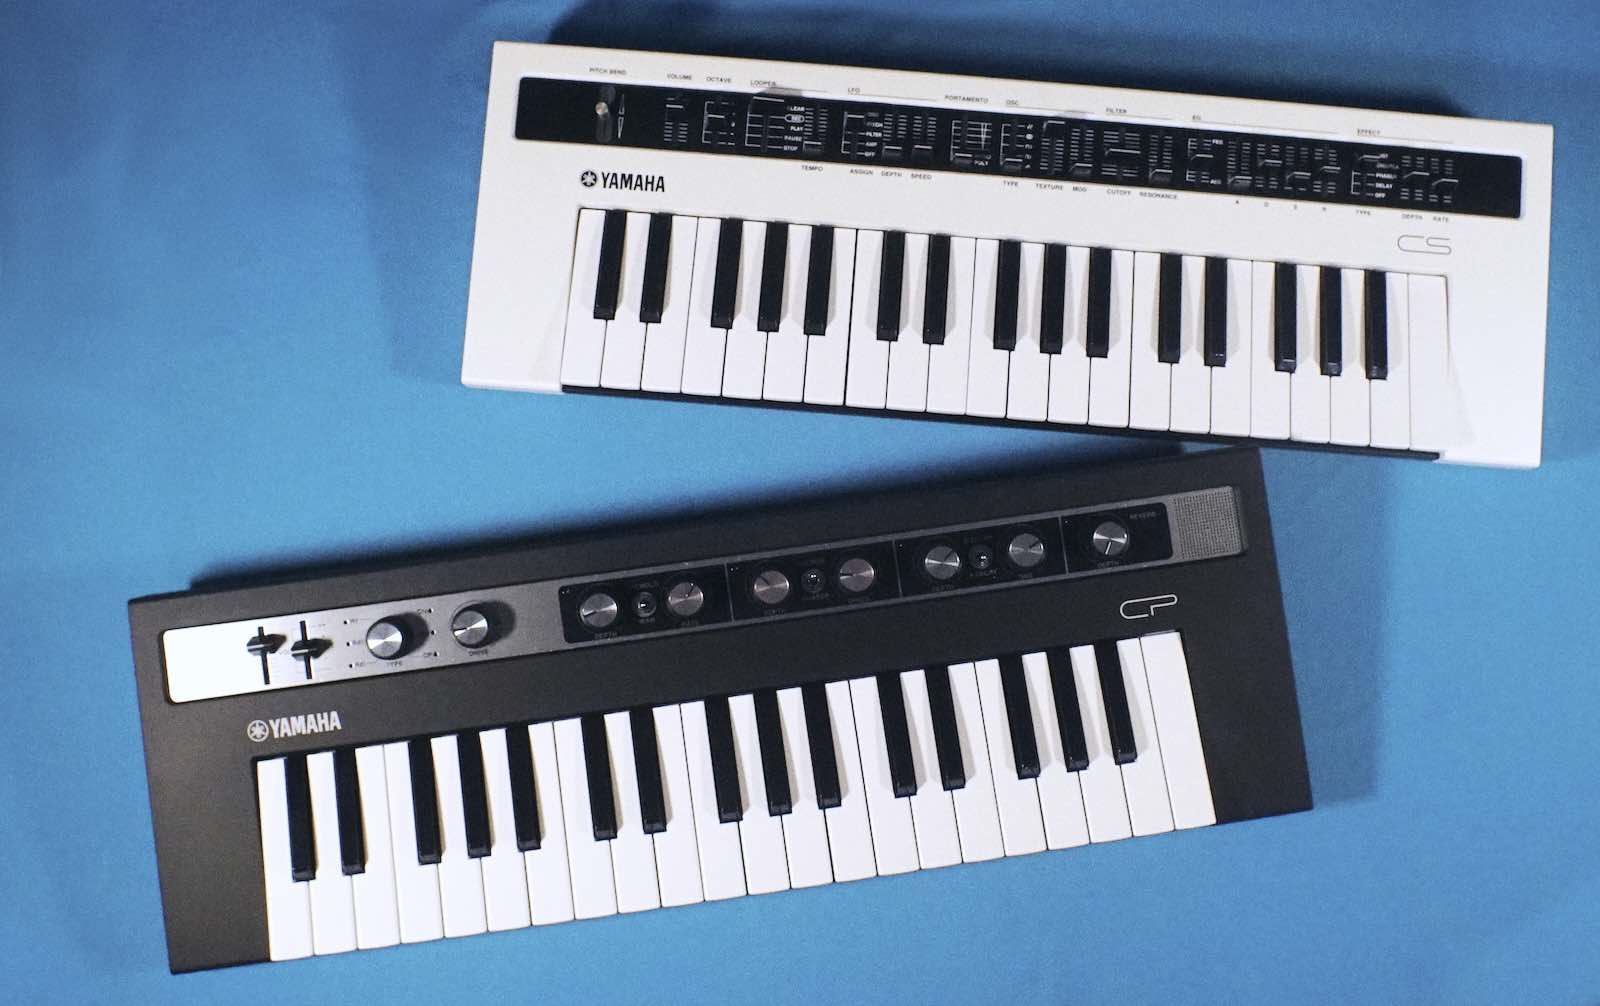 Yamaha Reface CS and CP keyboards on a blue background